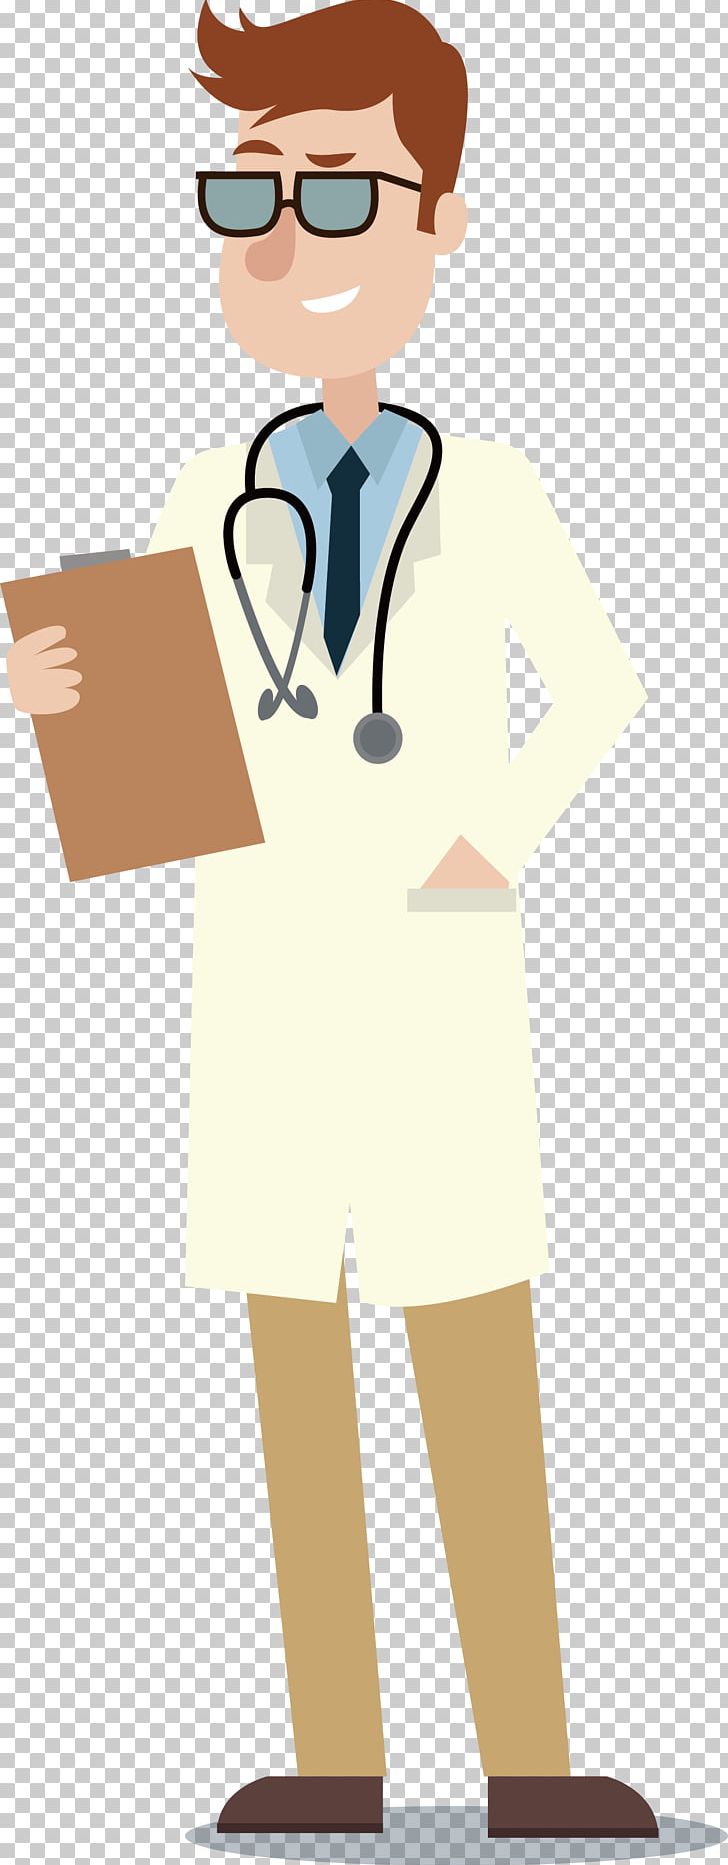 Glasses Physician PNG, Clipart, Broken Glass, Cartoon, Champagne Glass, Formal Wear, Glass Free PNG Download